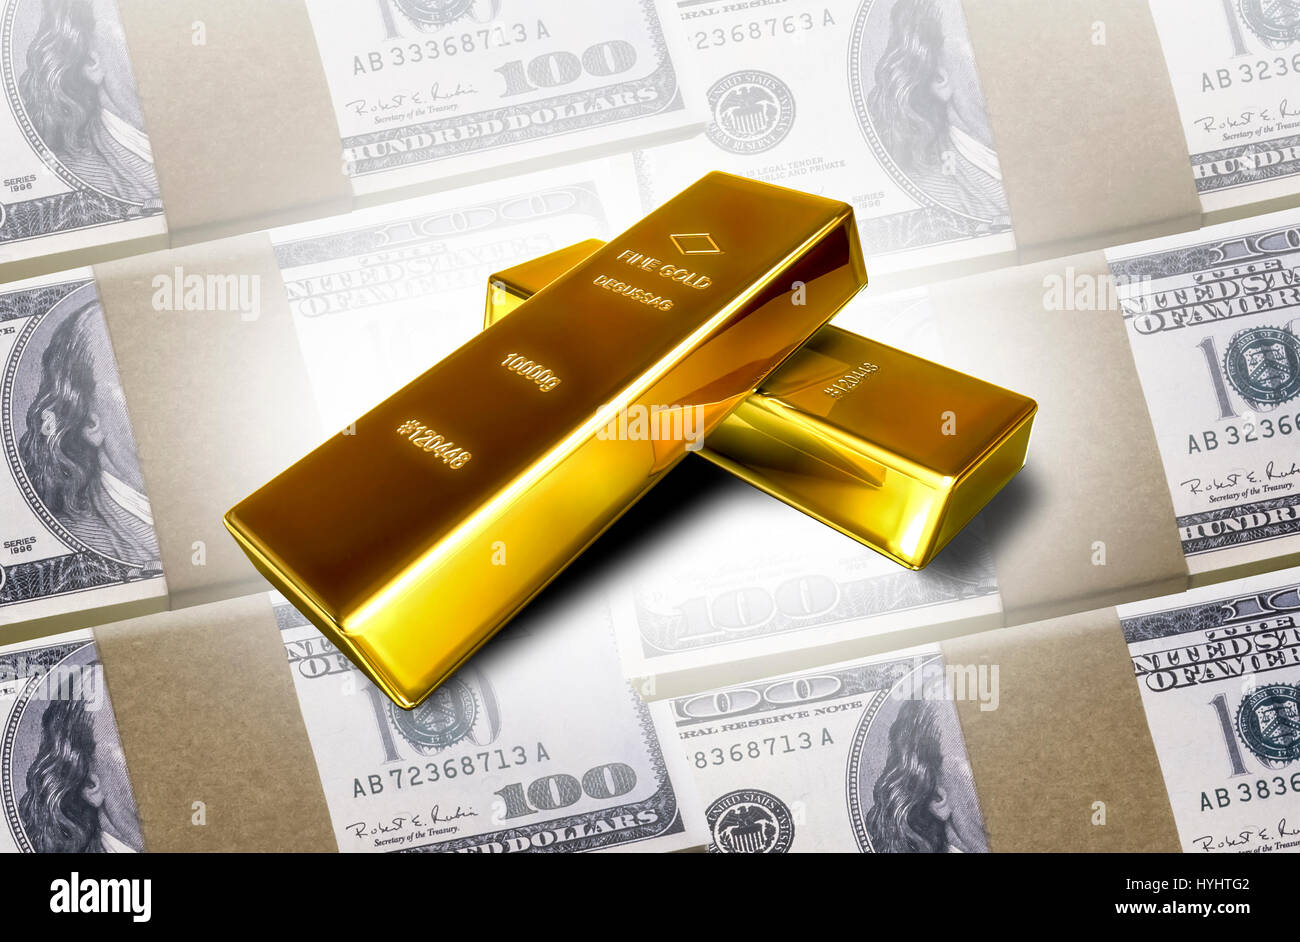 Two shiny precious bars of gold,isolated against the background. Stock Photo